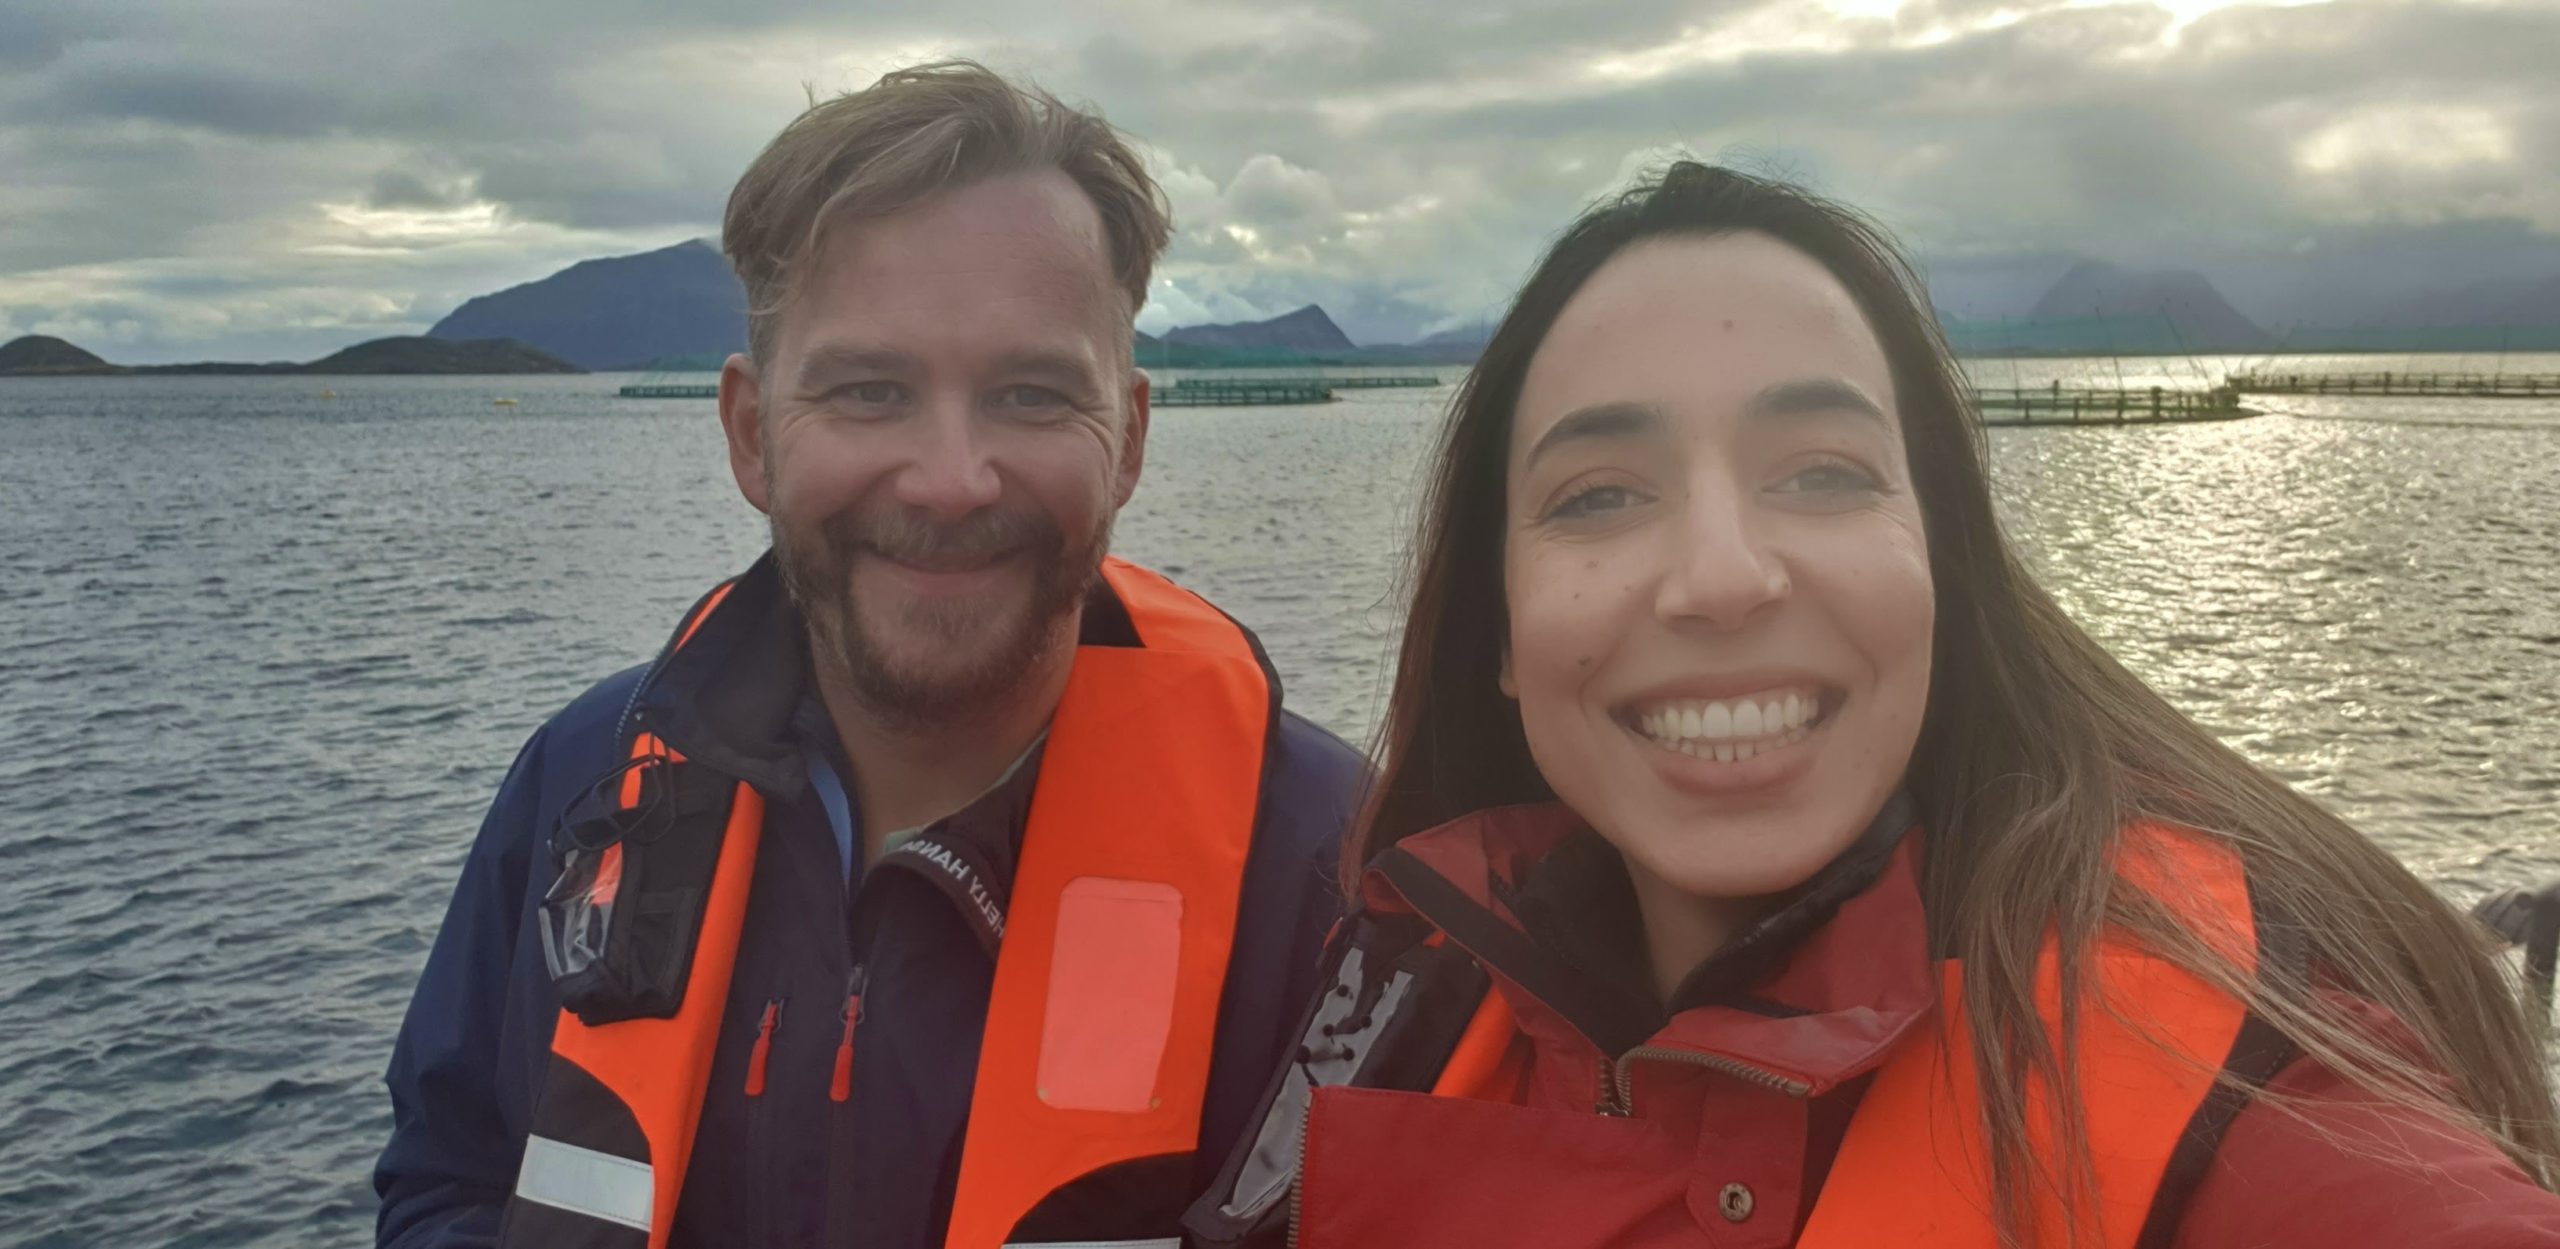 Scholarship recipient Marwa Mechlaoui with Kvarøy Arctic CEO Alf-Gøran Knutsen at the farm site 